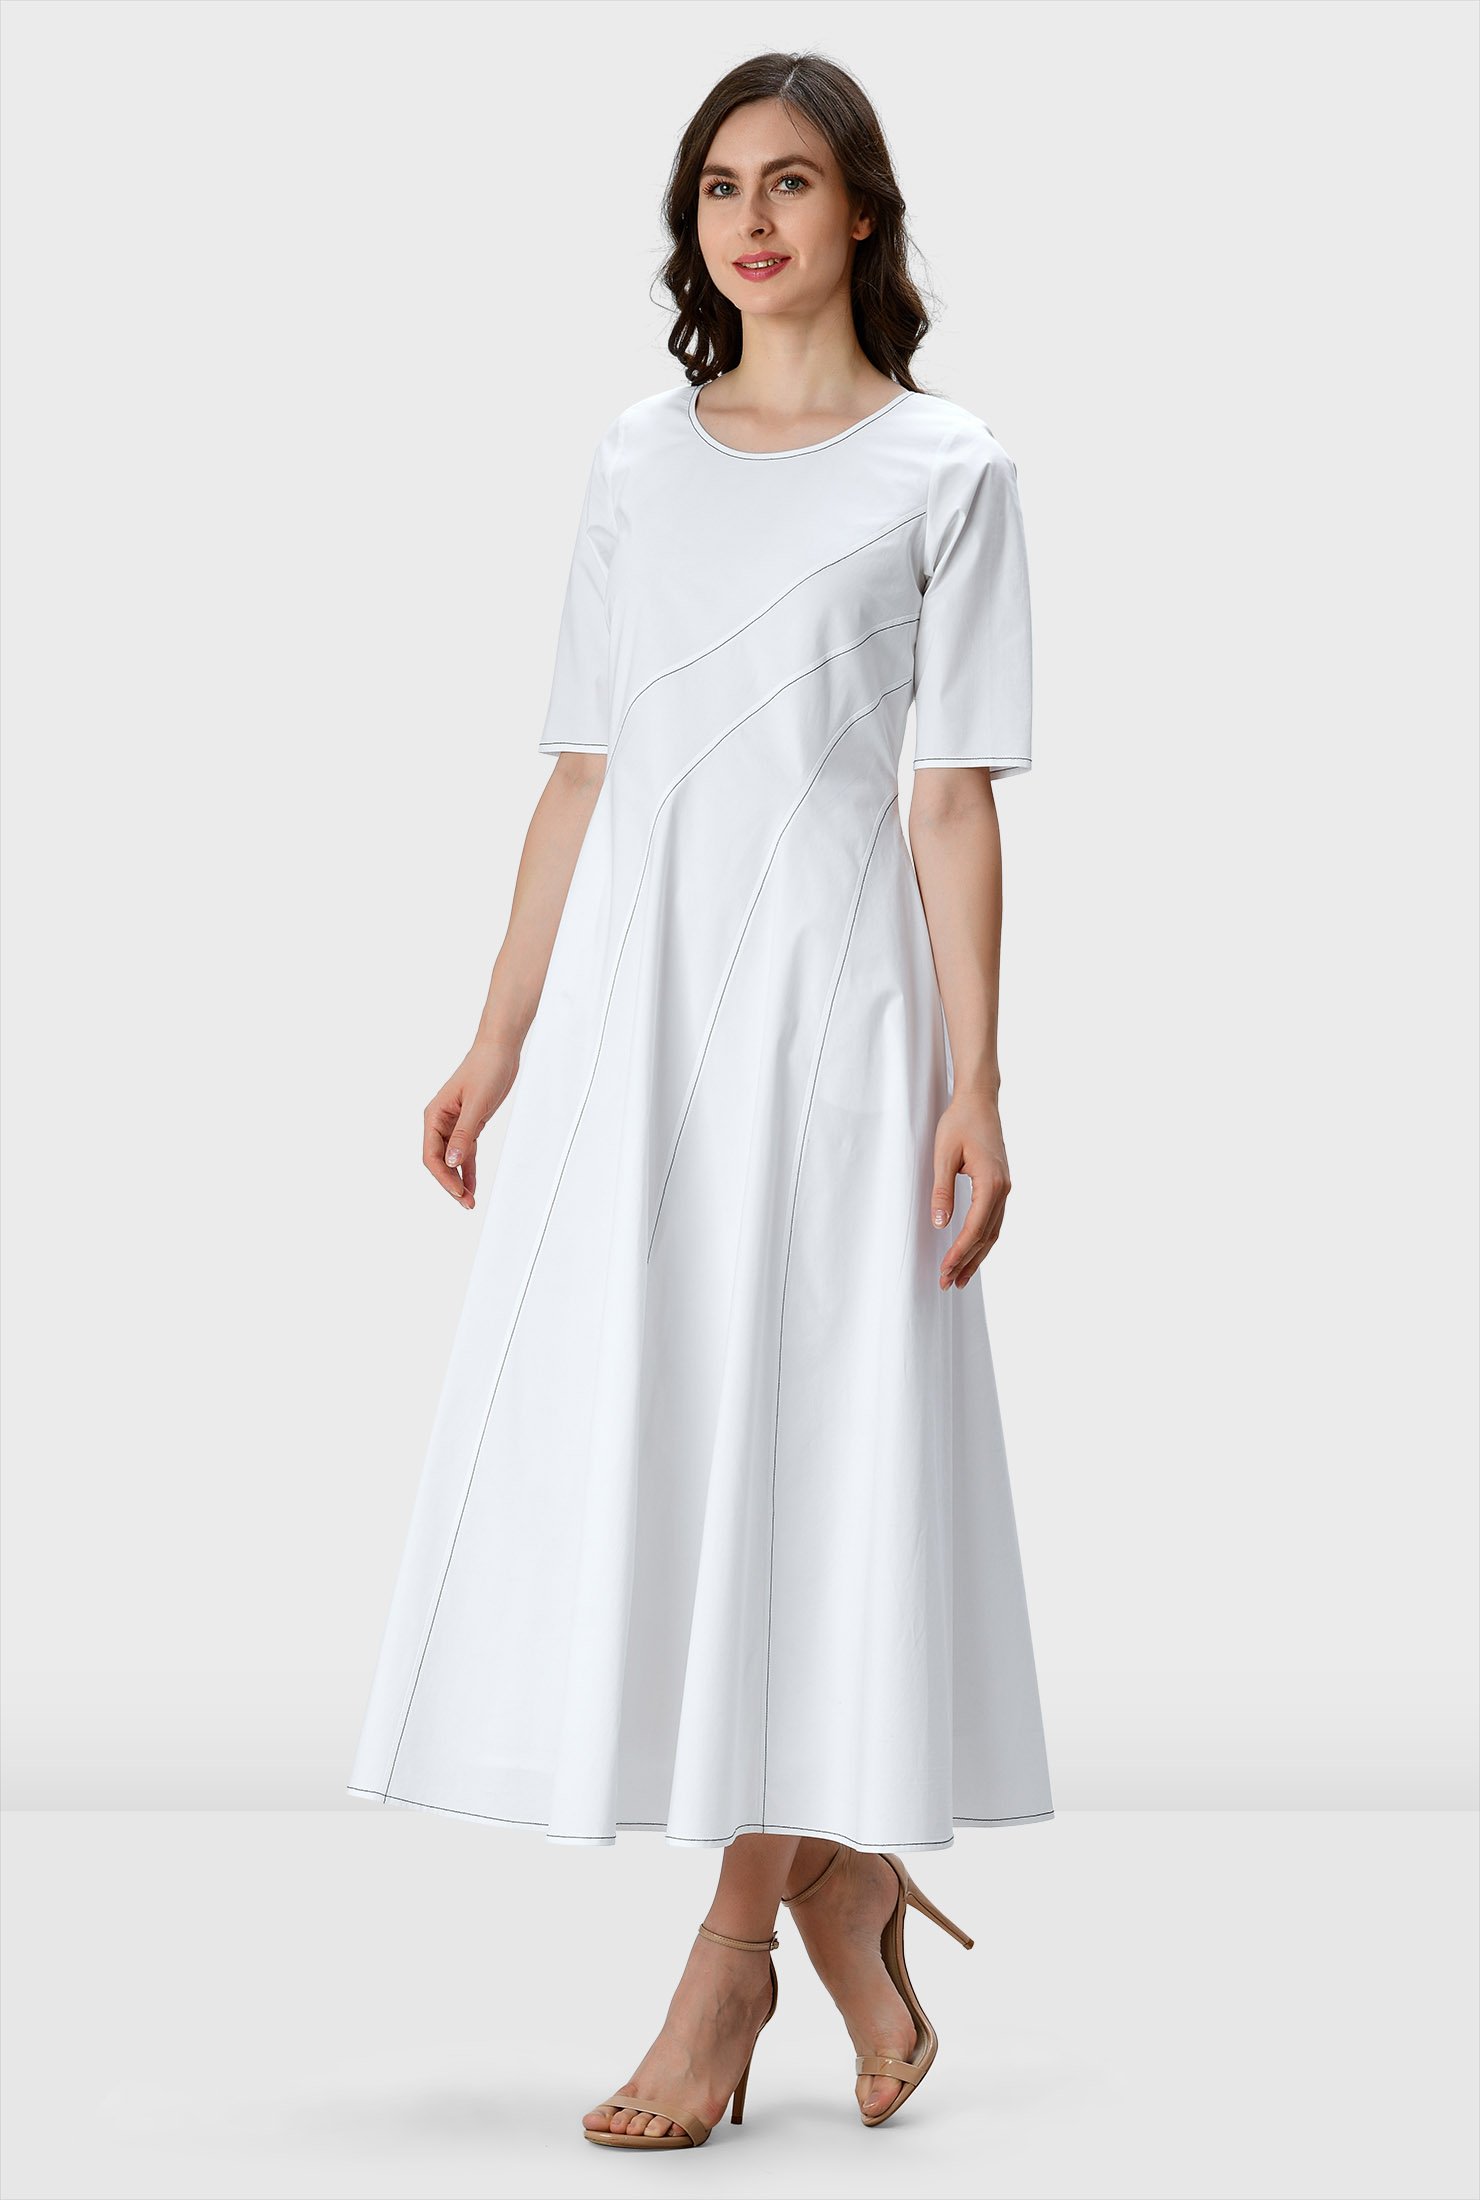 Our crisp cotton poplin dress is designed to flatter and enhance with asymmetric seams from the top to the full flare skirt and down to the contrast top-stitched hem.